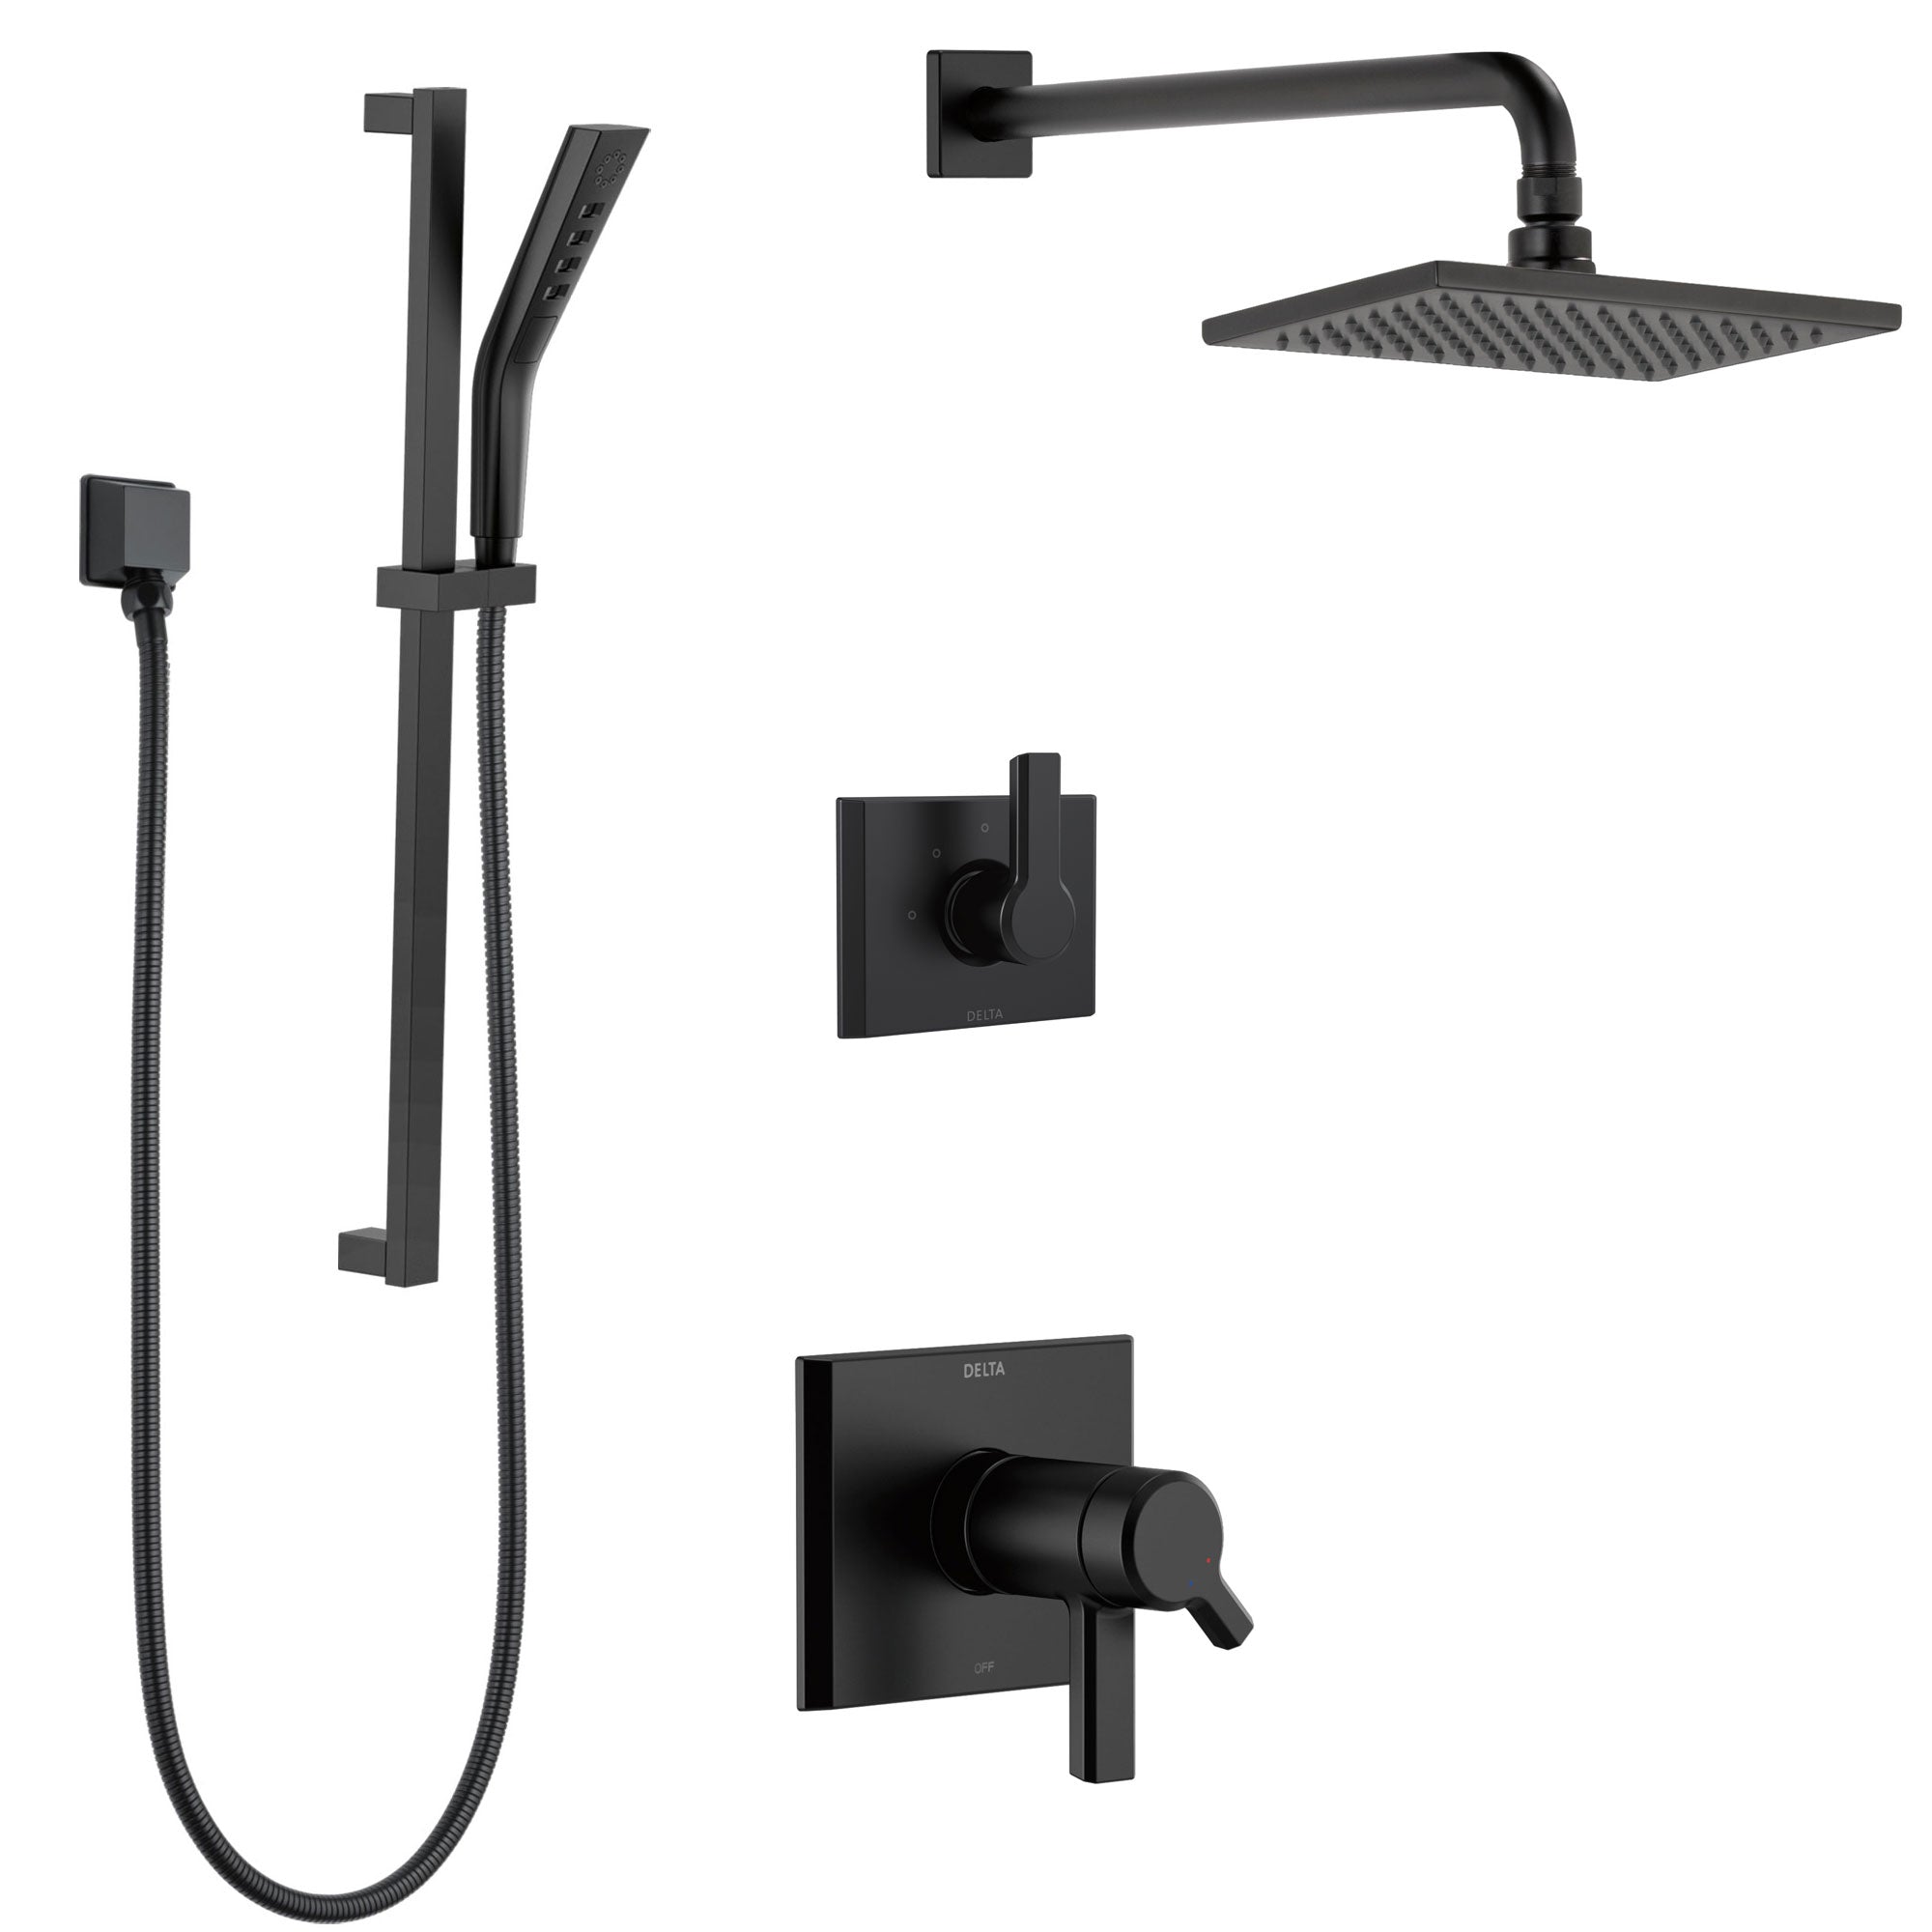 Delta Pivotal Matte Black Finish Thermostatic Dual Control Shower System with Wall Mount Rain Showerhead and Hand Shower with Slide Bar SS17T2993BL2